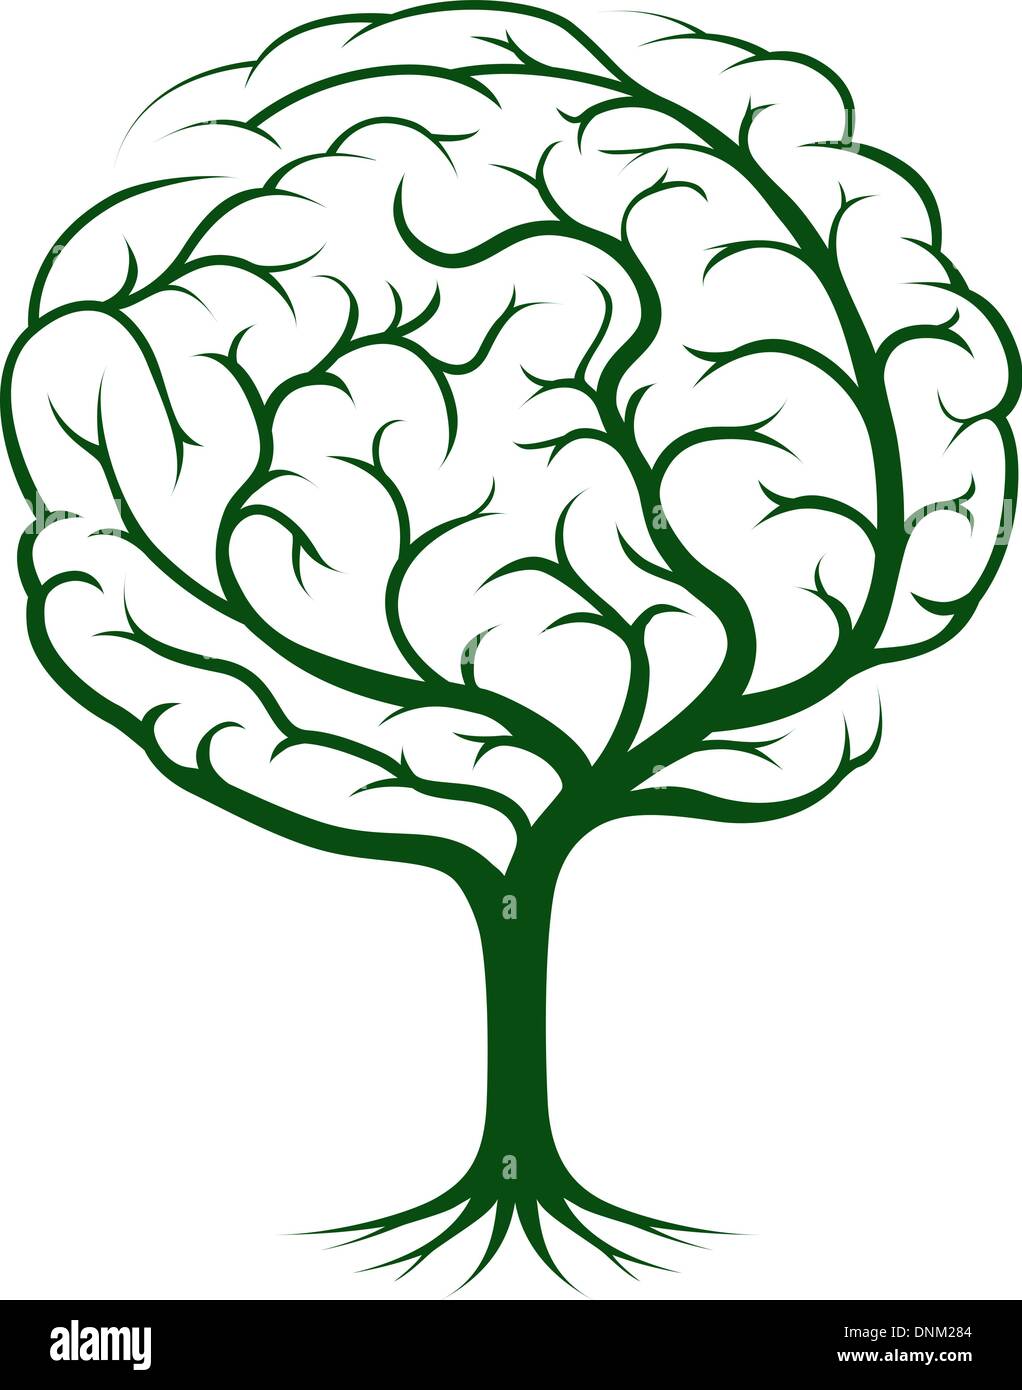 Brain tree illustration, tree of knowledge, medical, environmental or psychological concept Stock Vector